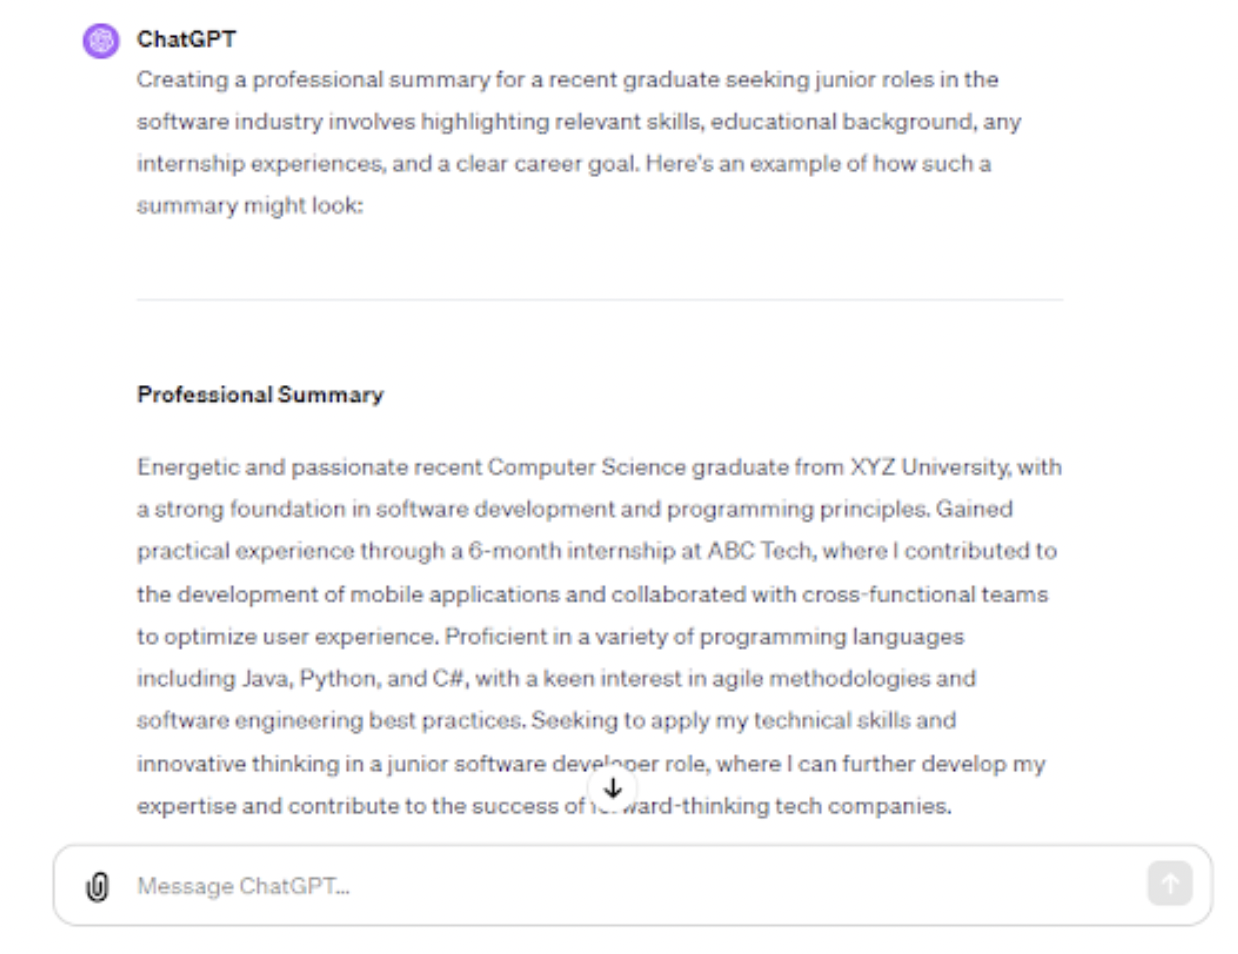 <p>While creating a resume, you should include an engaging professional summary that captures your qualifications, values, and career goals. Once again, ChatGPT can provide suggestions for wording and structuring the professional summary section.</p><p>For instance, the prompt “Create a professional summary for a recent graduate looking for junior roles in the software industry” resulted in the following ChatGPT output:</p>